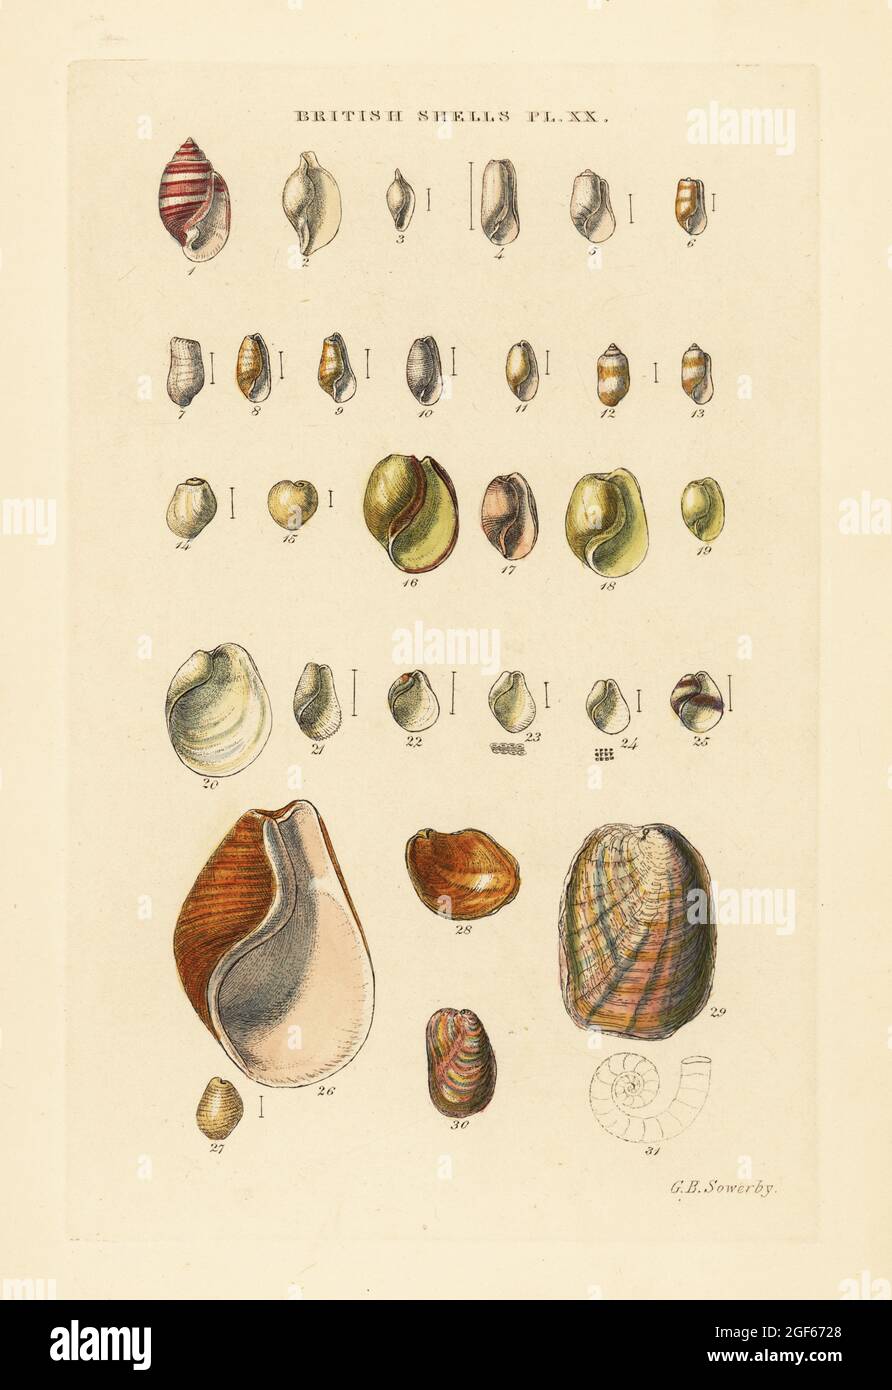 Bubble snails and sea snail varieties, Cylichna, Ovula, Bulla, Philine, etc. Handcoloured copperplate engraving by George Brettingham Sowerby from his own Illustrated Index of British Shells, Sowerby and Simpkin, Marshall & Co., London, 1859. George Brettingham Sowerby II (1812-1884), British naturalist, illustrator, and conchologist. Stock Photo